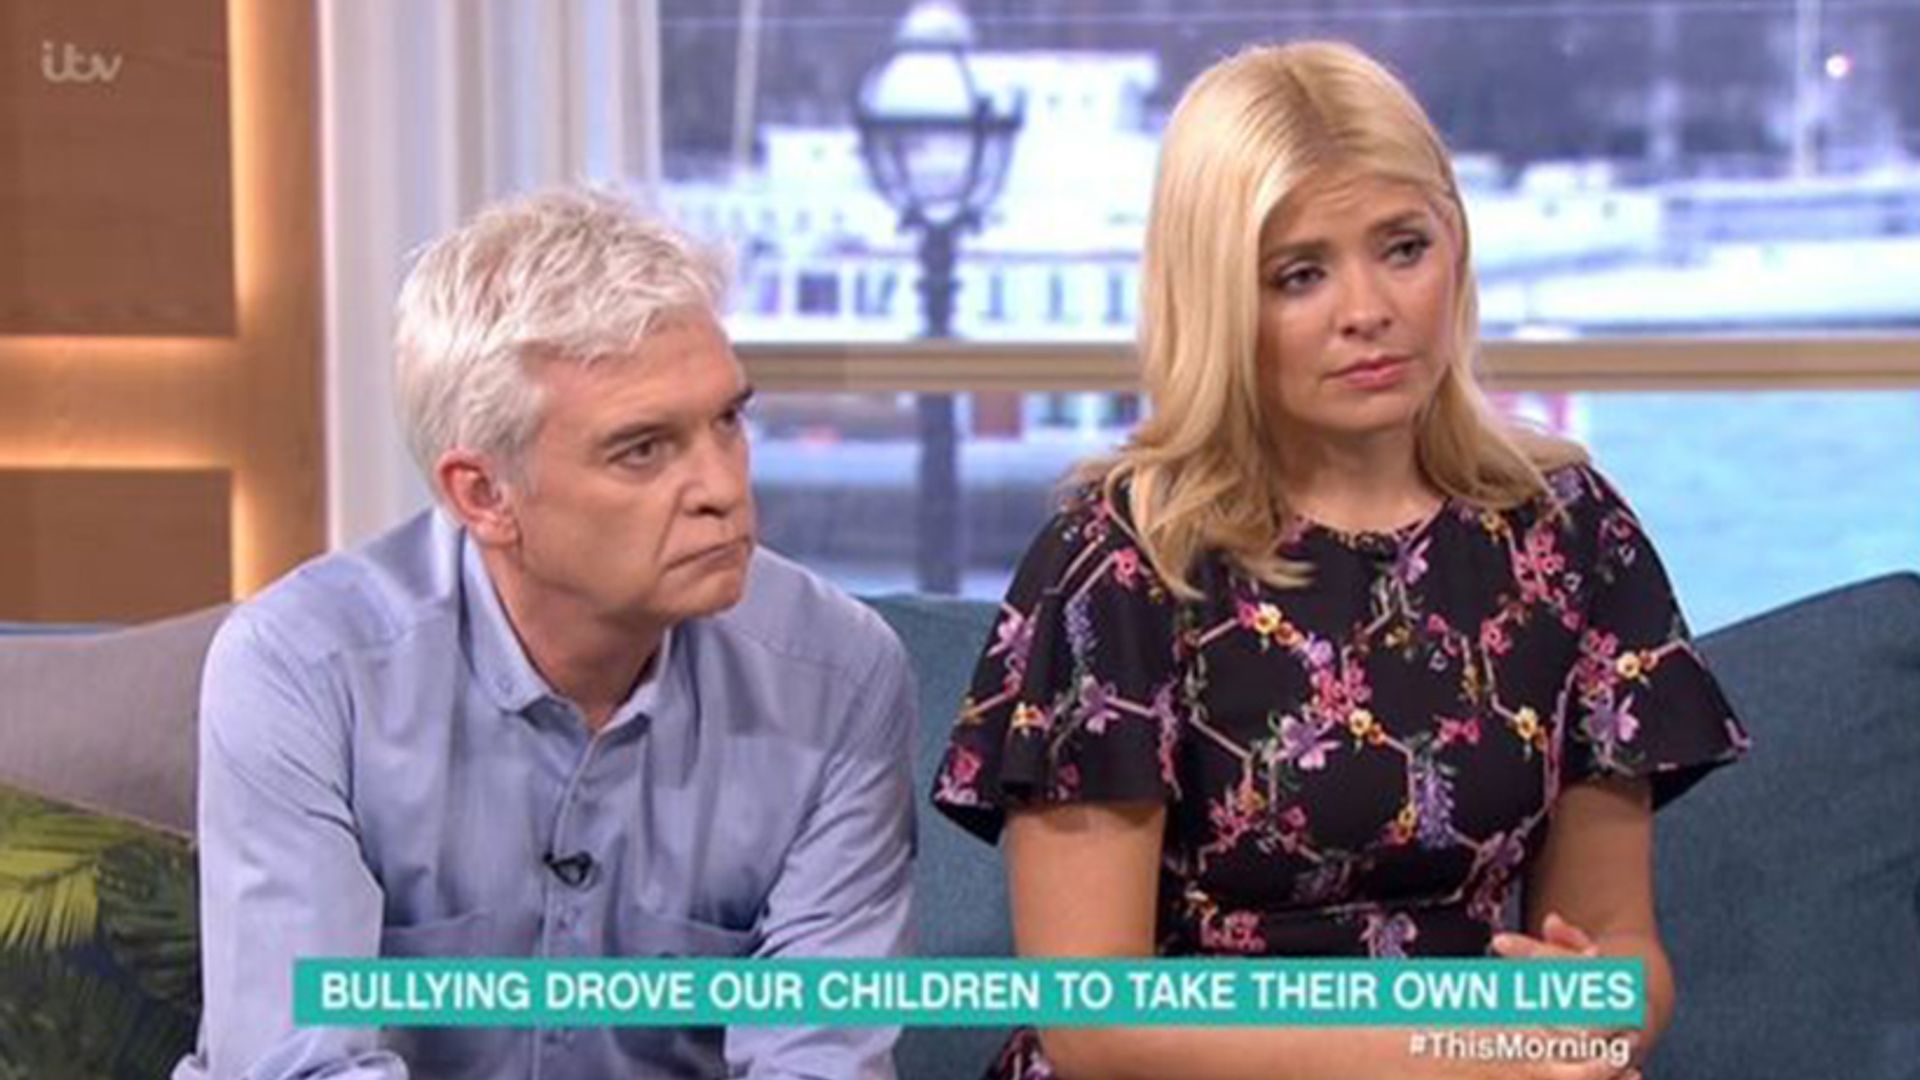 Holly Willoughby and Phillip Schofield in tears as they discuss cyberbullying